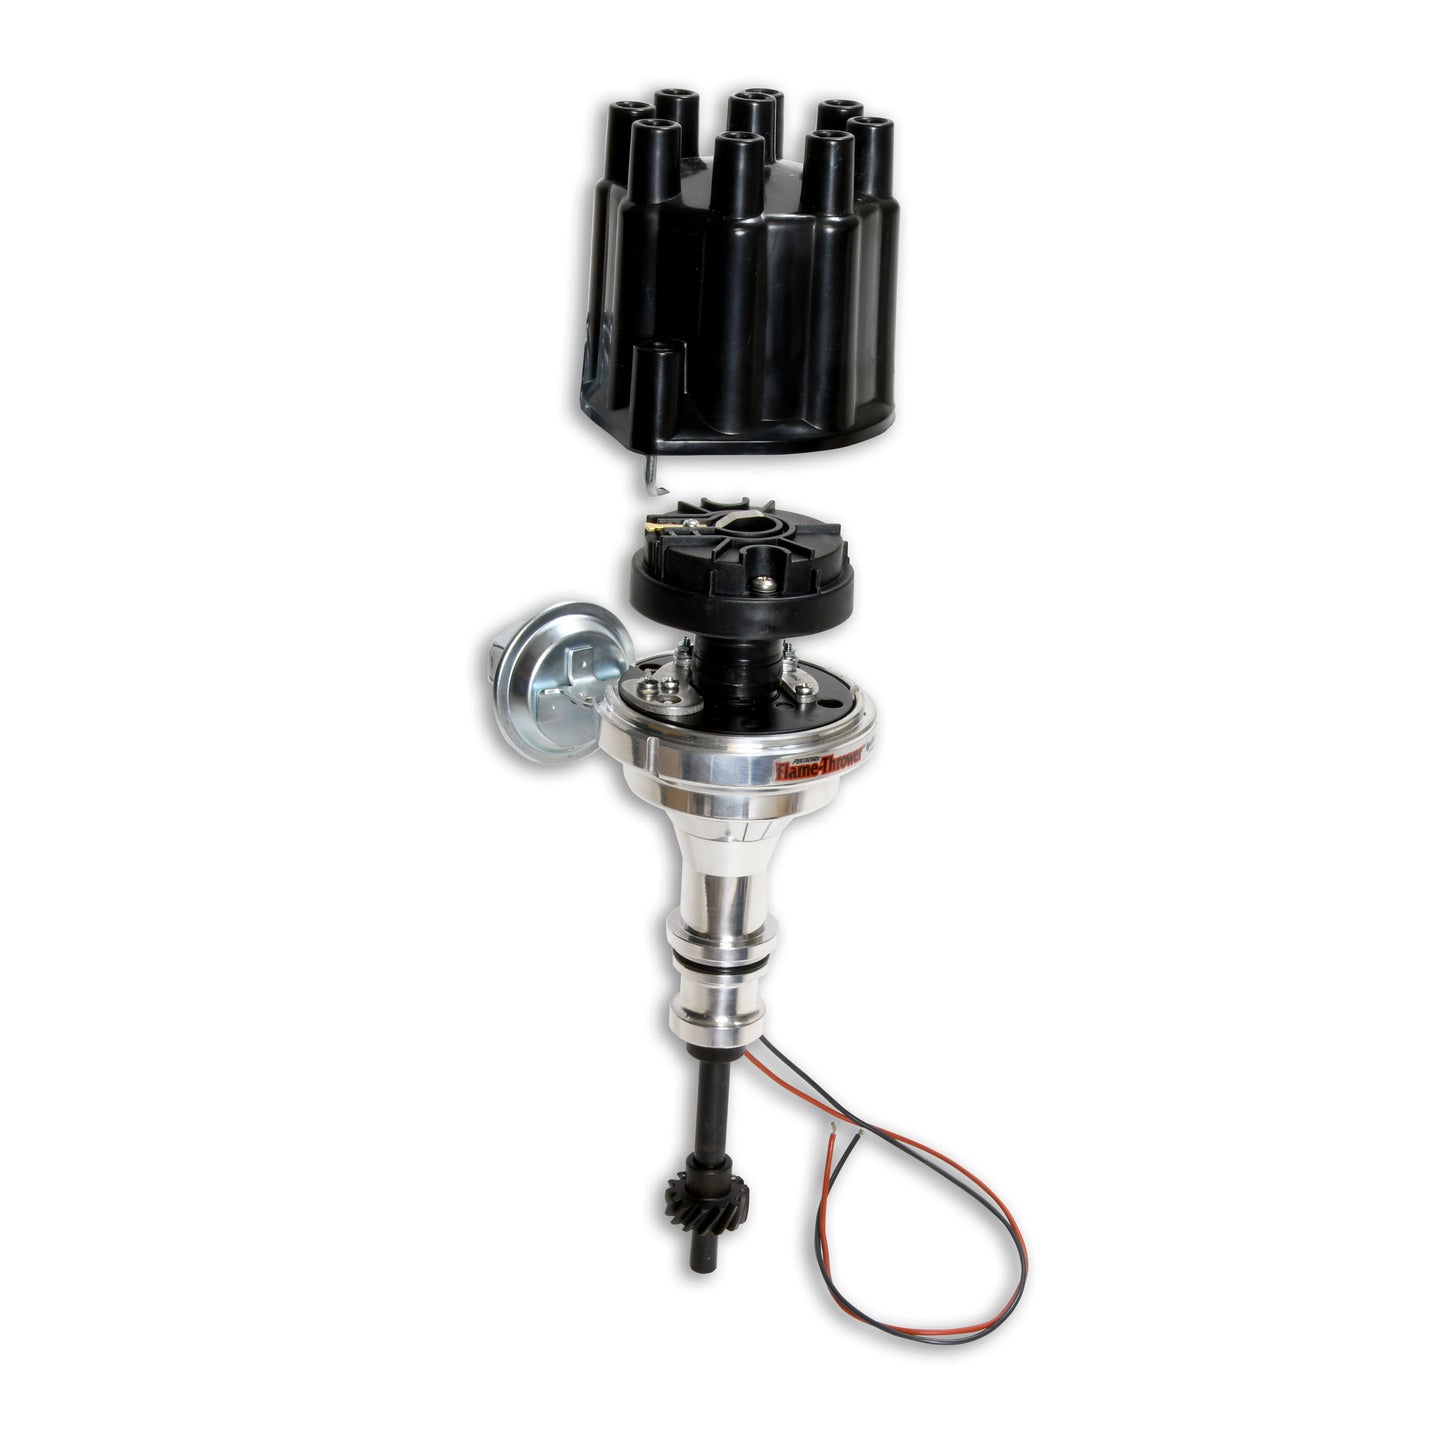 PerTronix Flame Thrower D135700 Billet Distributor with Ignitor II Ford Y-Block